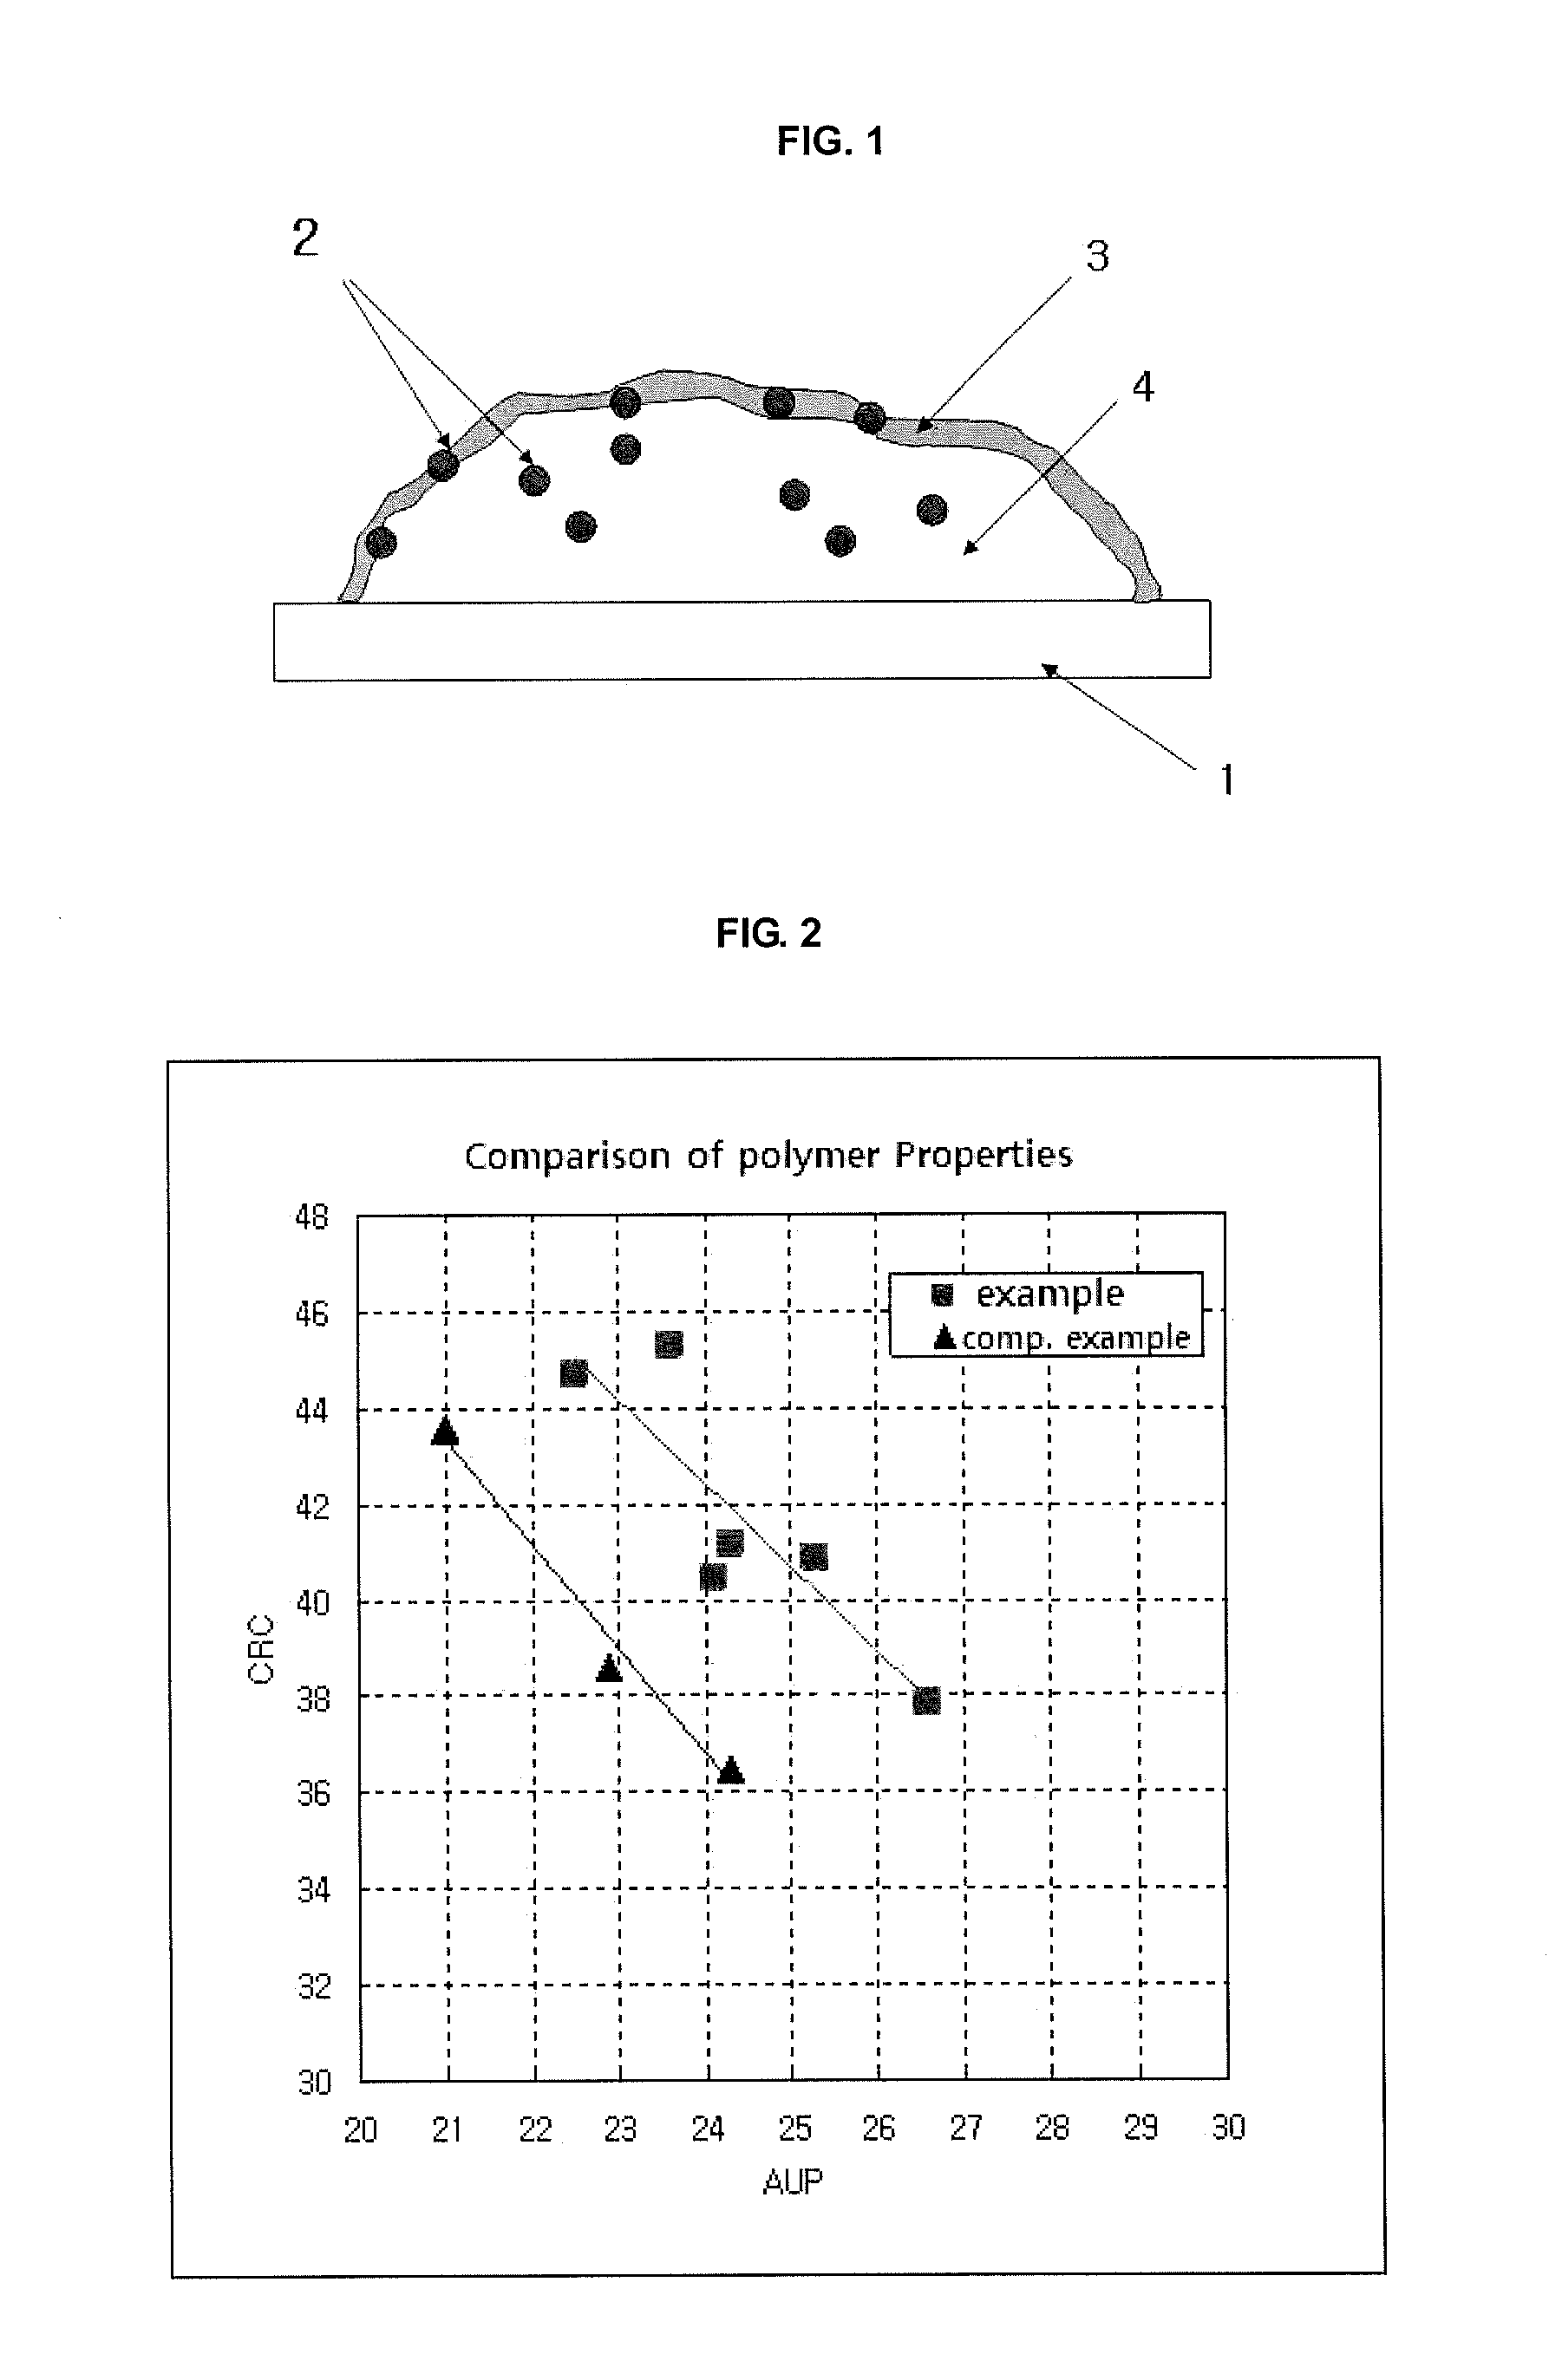 Process for Preparing Super Absorbent Polymers